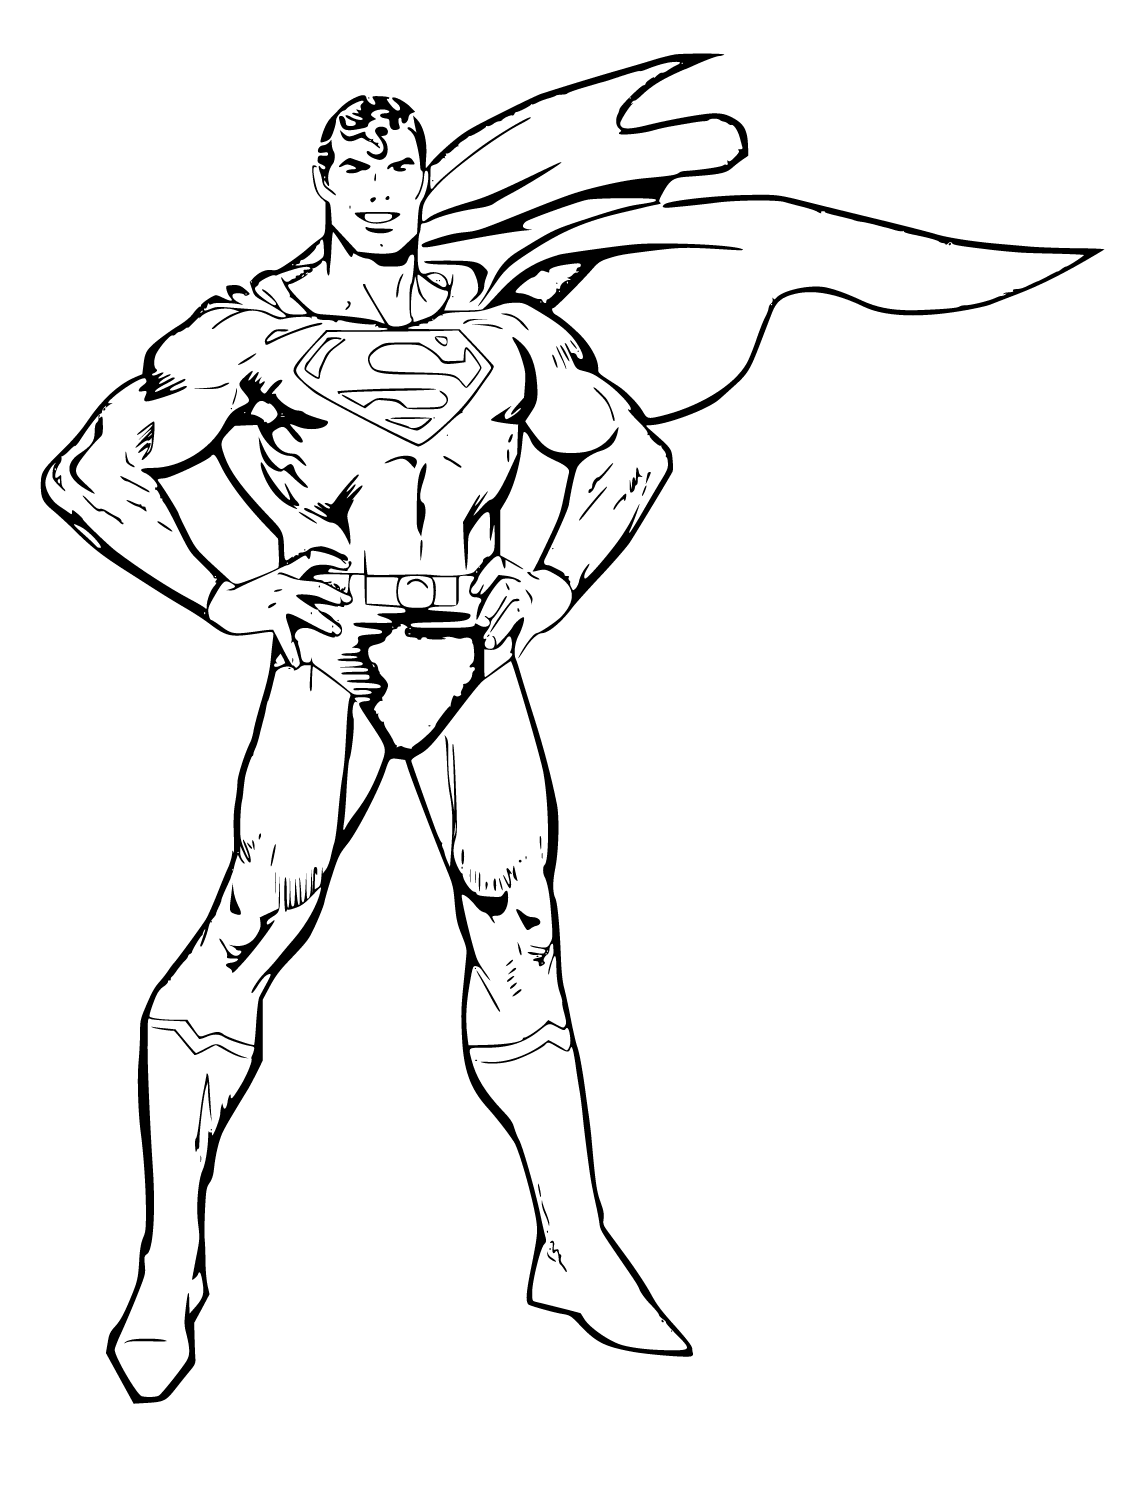 Superman Coloring Pages (16 Printable Sheets, Simple to Draw, Easy for ...